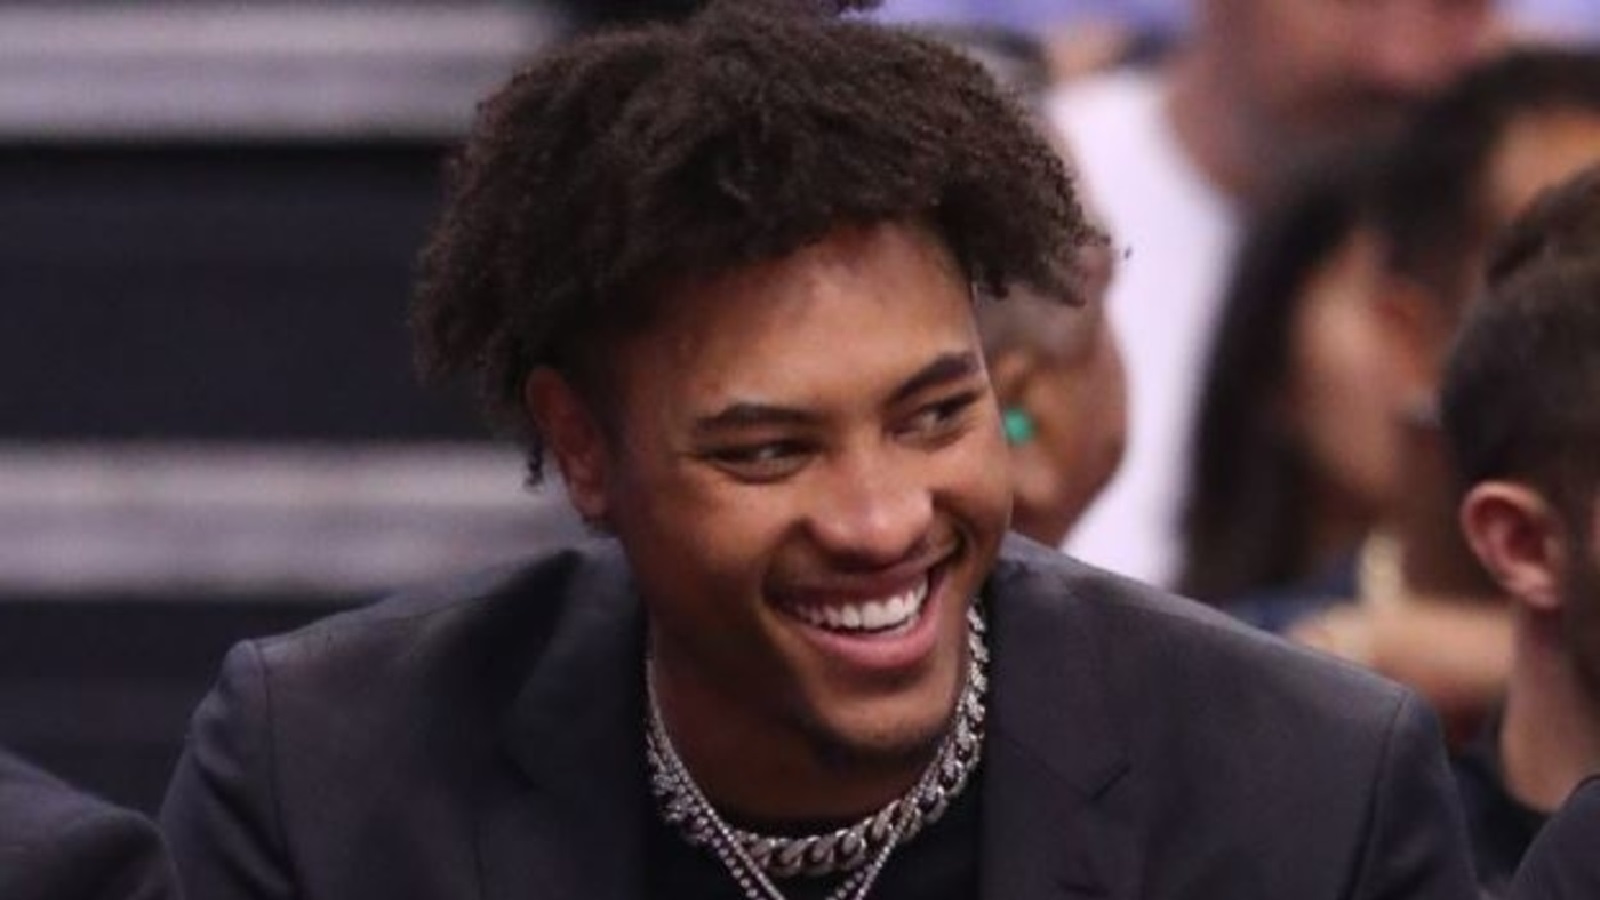 Kelly Oubre signs with the Philadelphia 76ers: What does it mean